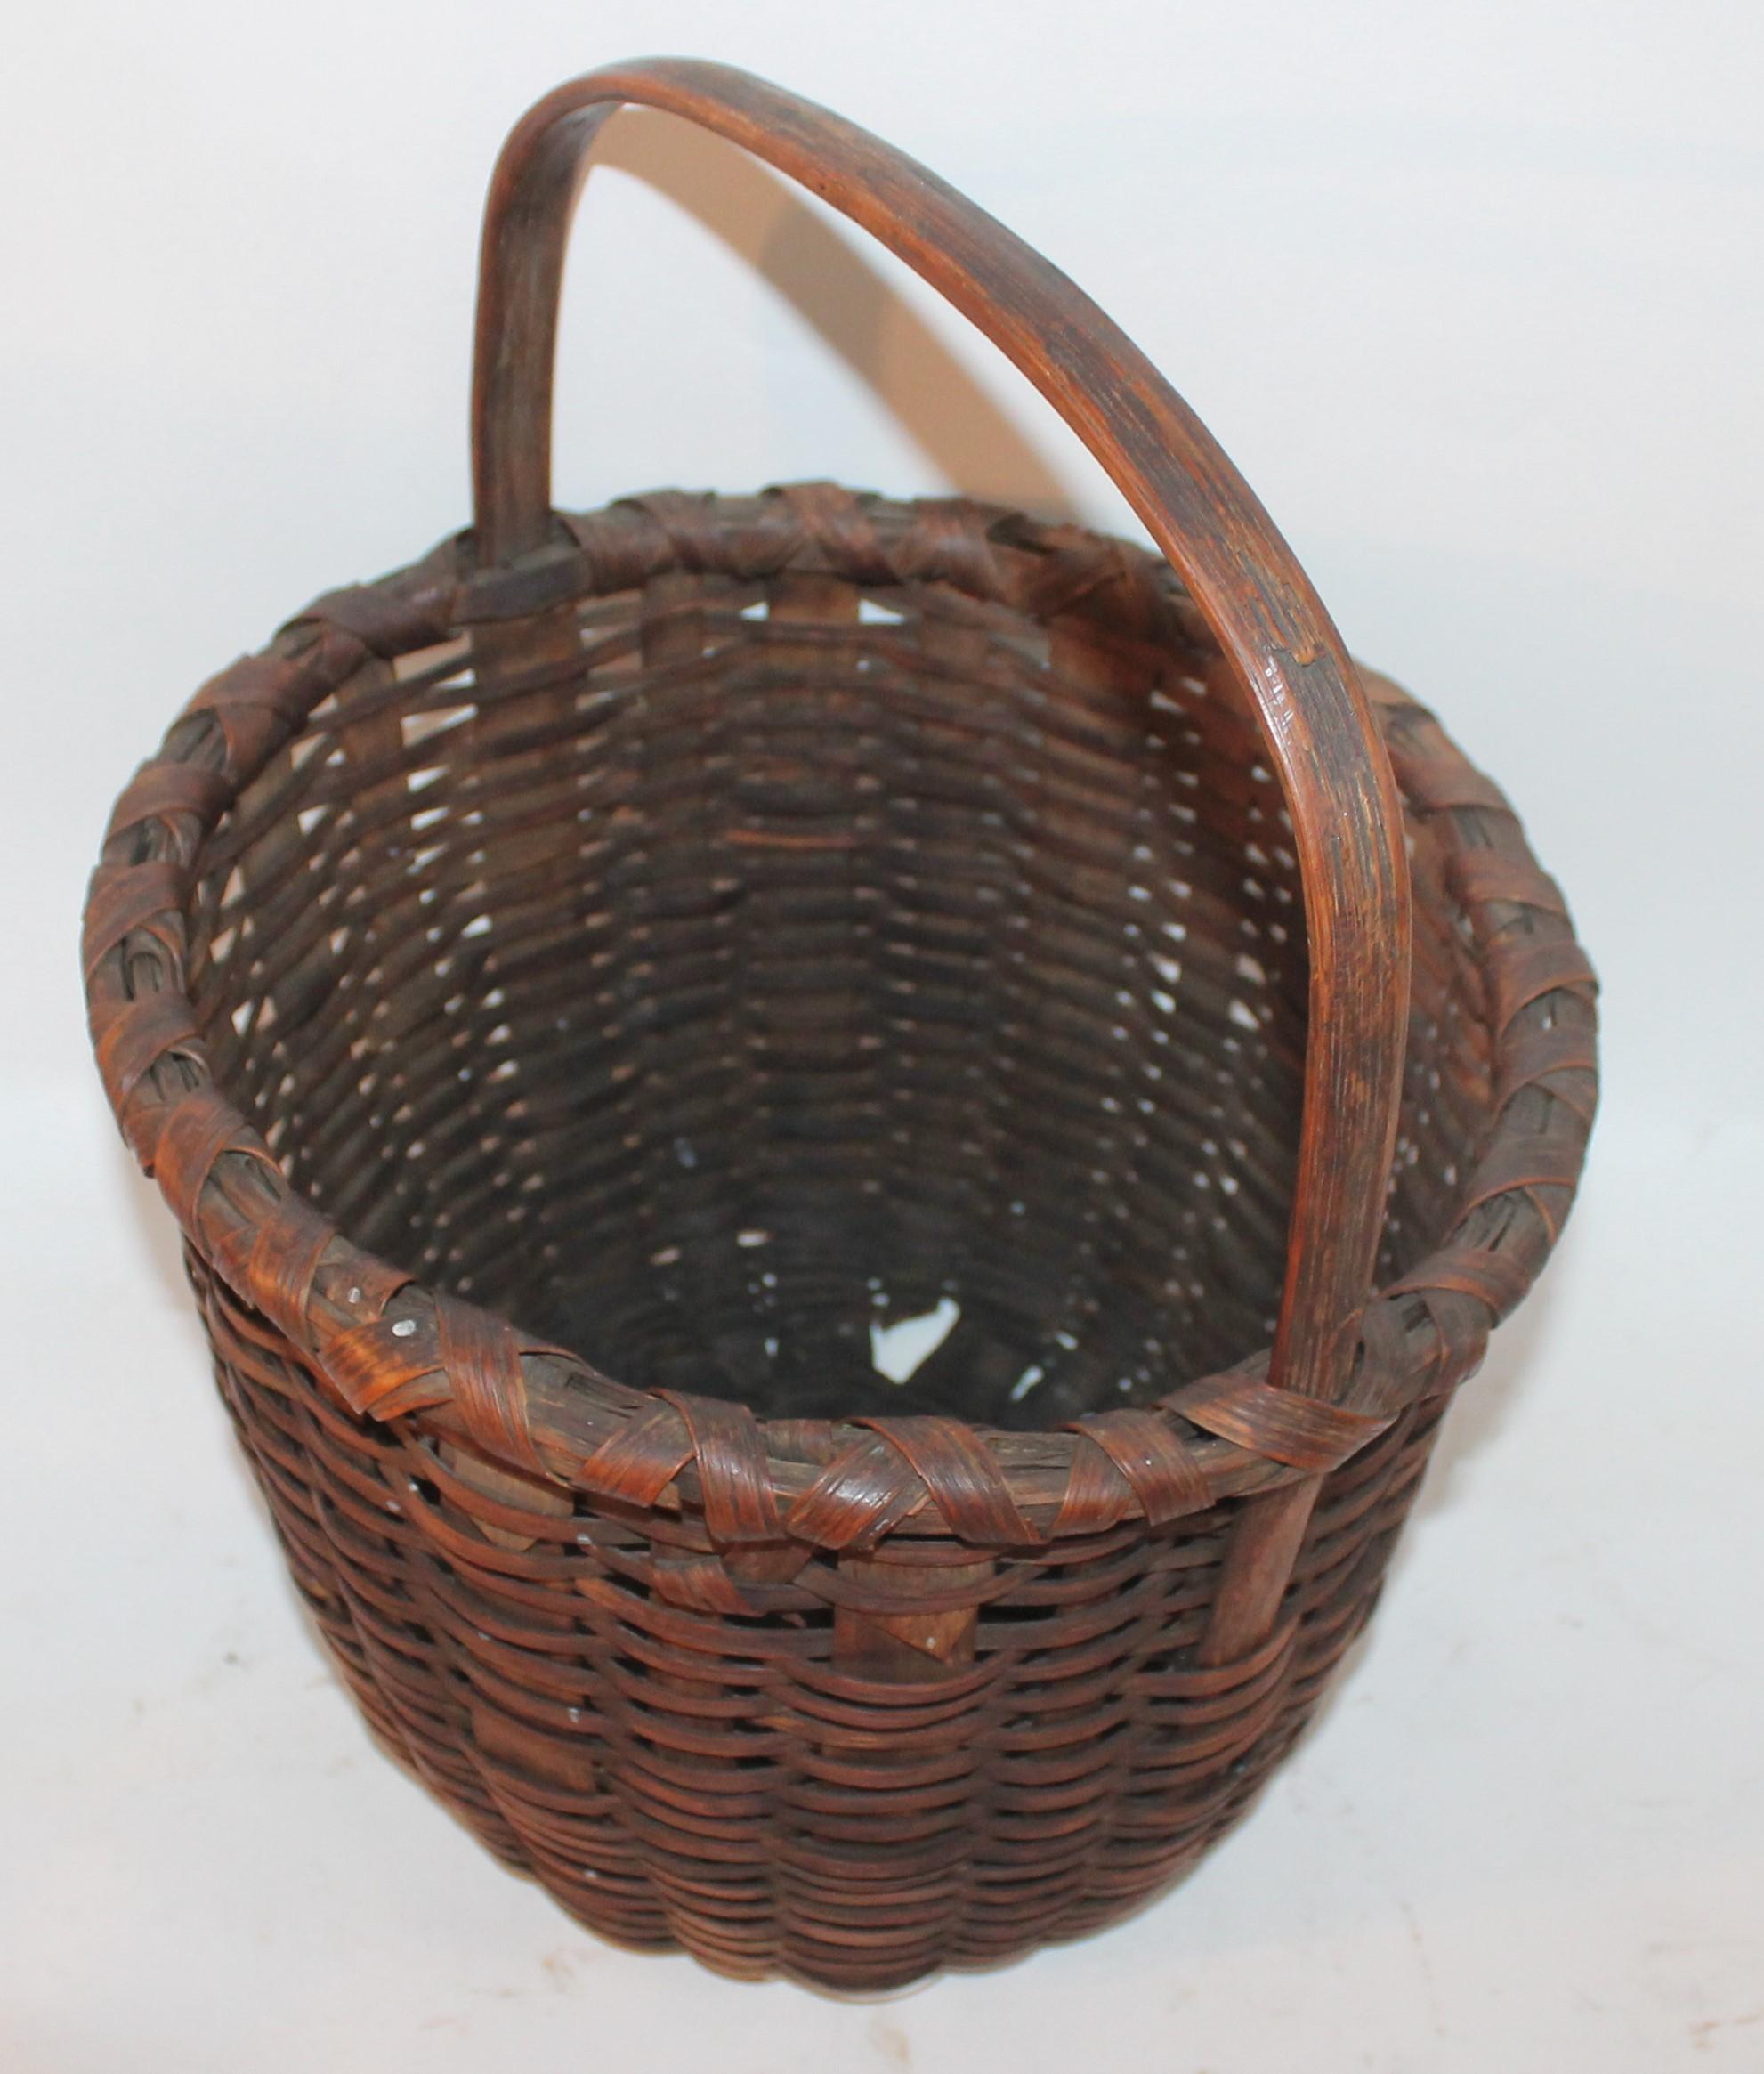 Hand-Woven 19th Century Baskets from New England / Collection of Seven